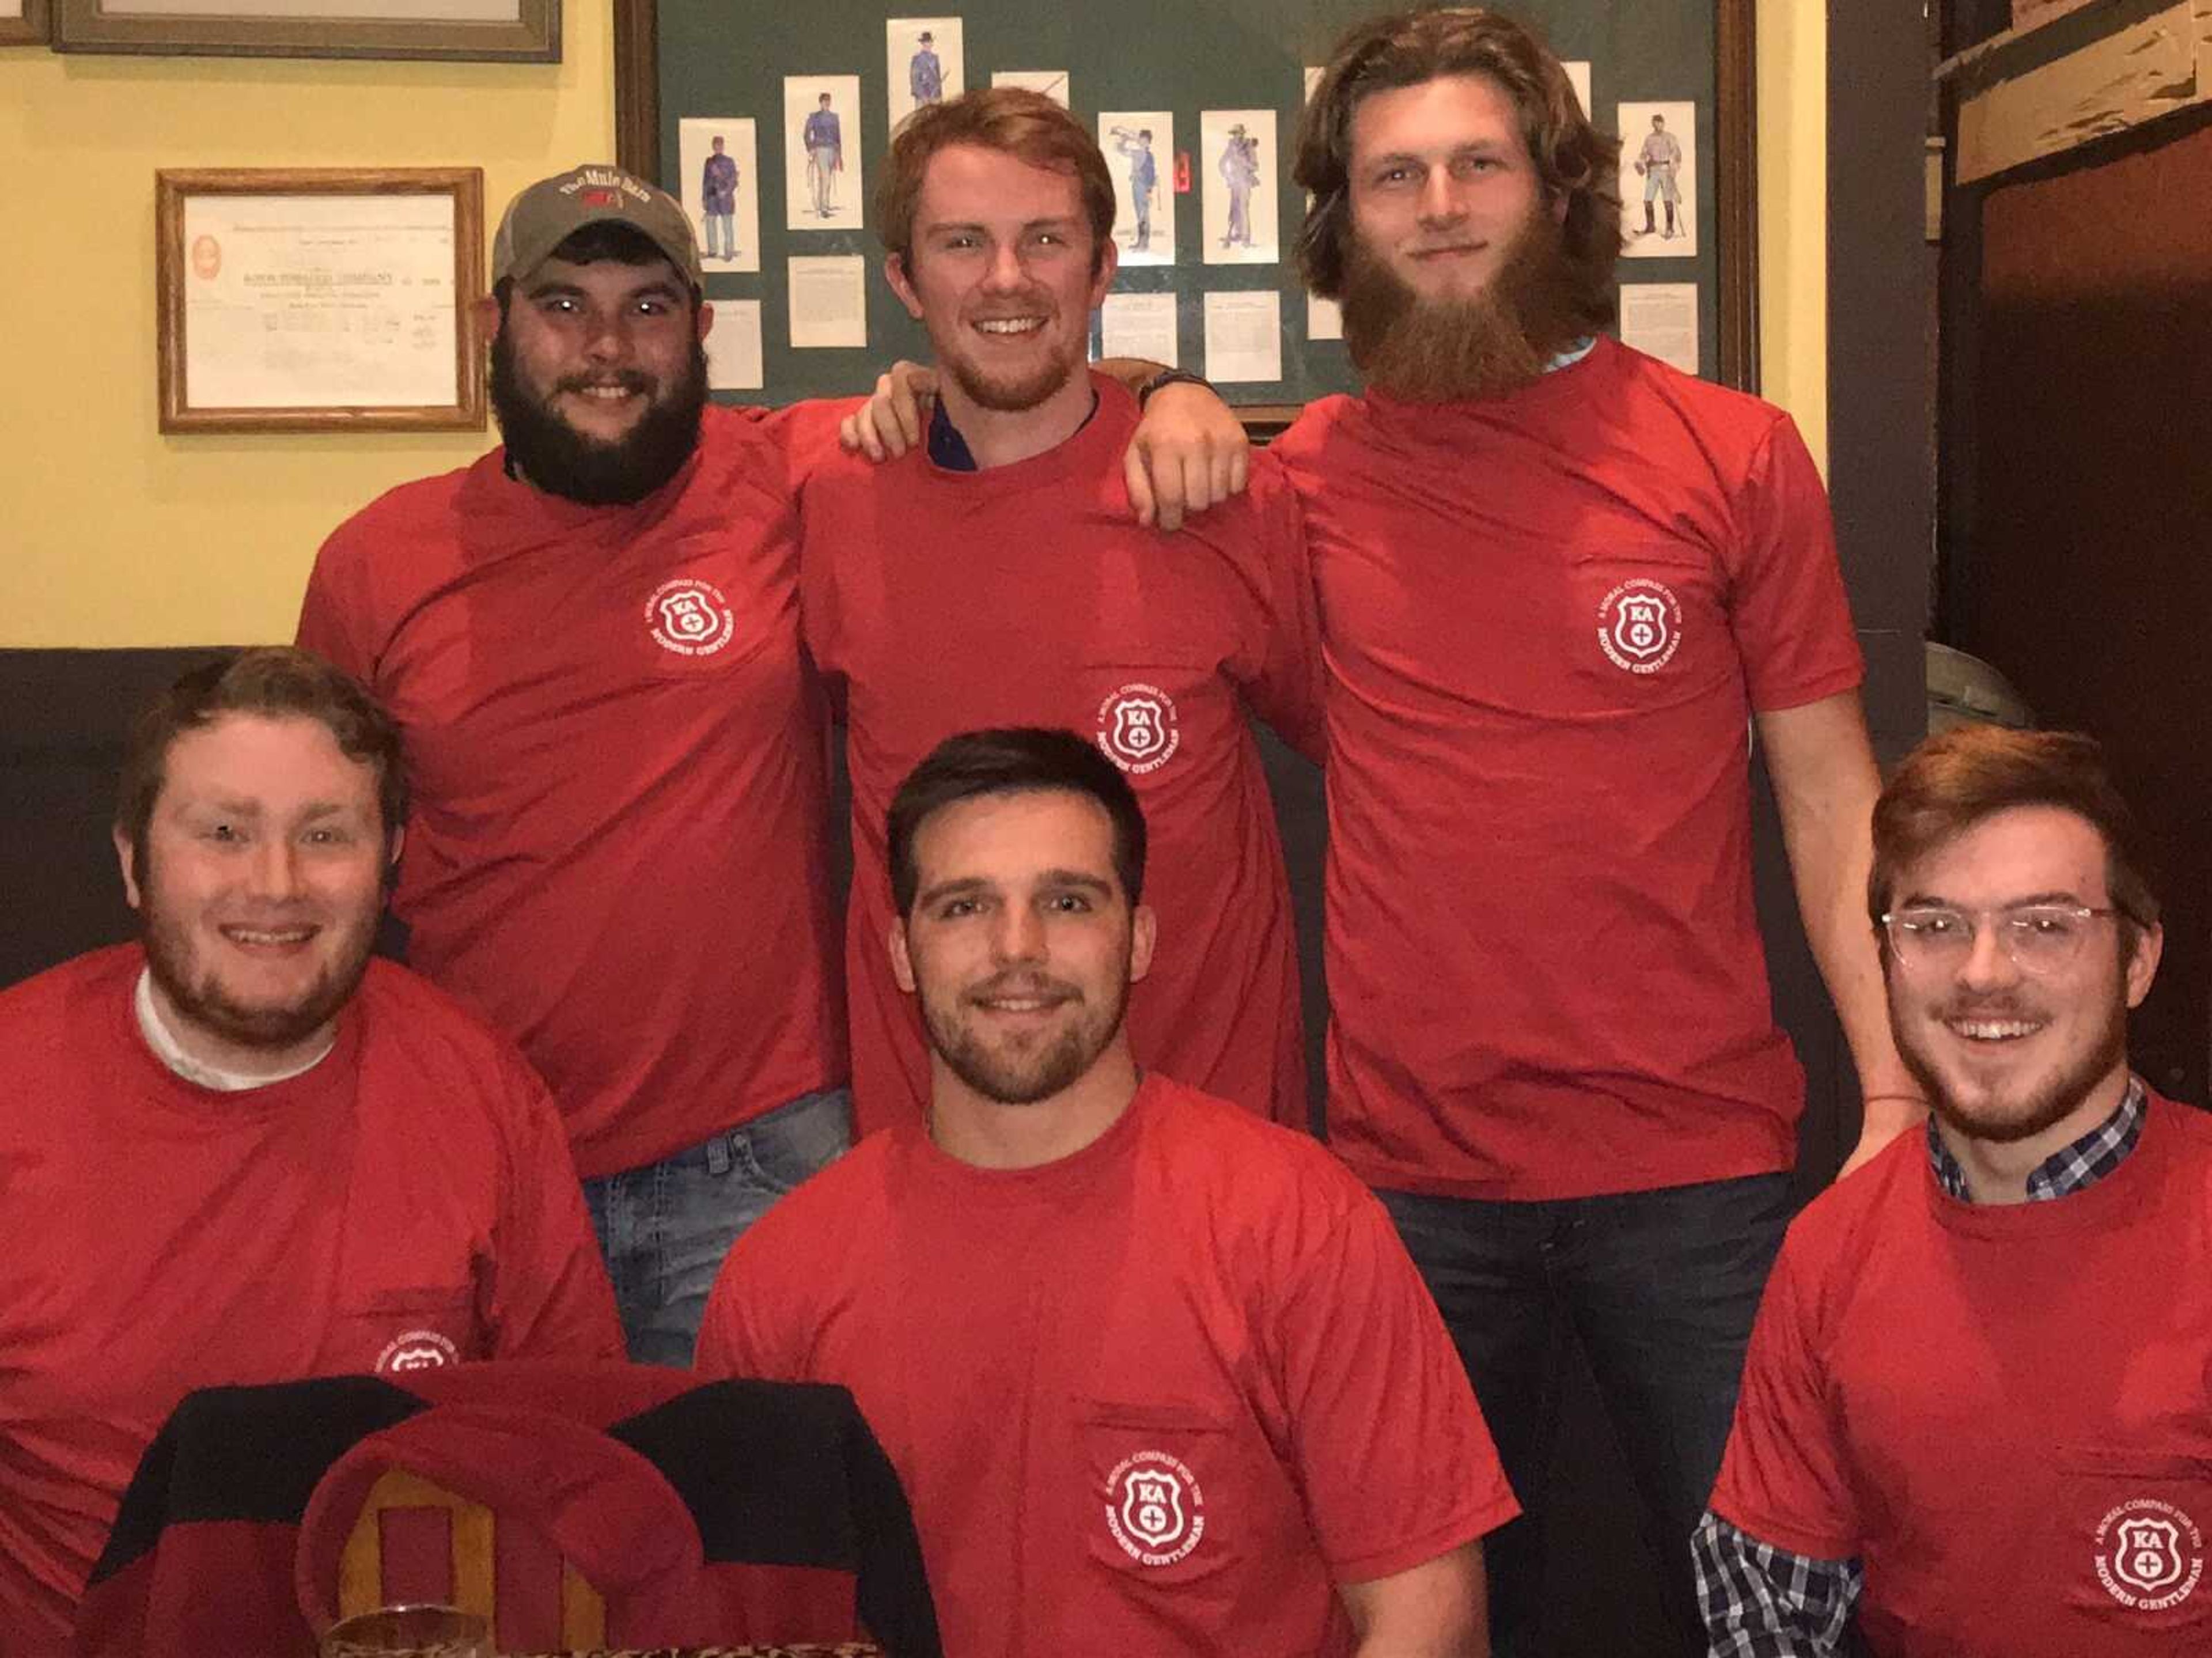 Kappa Alpha Order's first six men that have received official invitations to be members. Top from left to right: Junior Matt Butler, Freshman Clayton Hubert and Junior Ty Crowden 
Bottom from left to right: Freshman Conner Edmister, Junior Clay Collier and Freshman John Paul Hutchinson
